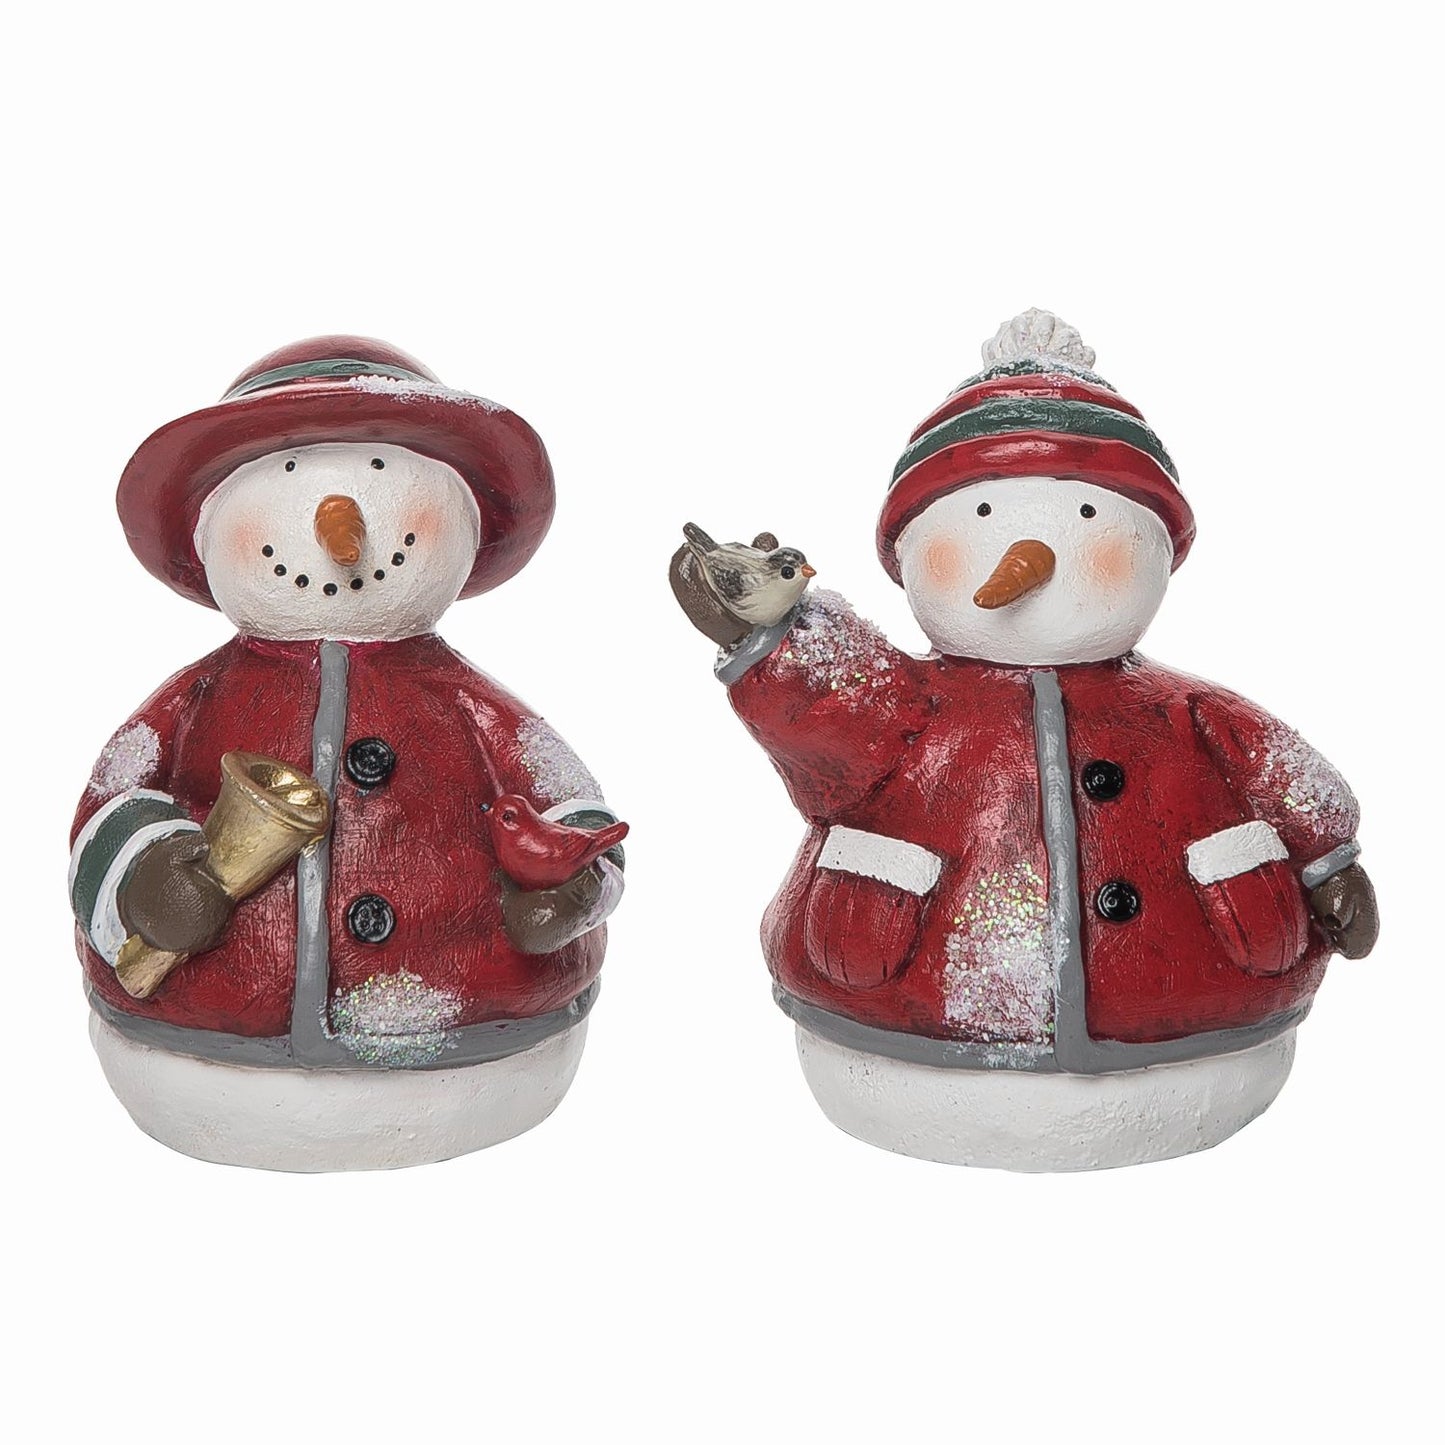 Transpac Resin Quilted Snowman Figurine, Set Of 2, Assortment